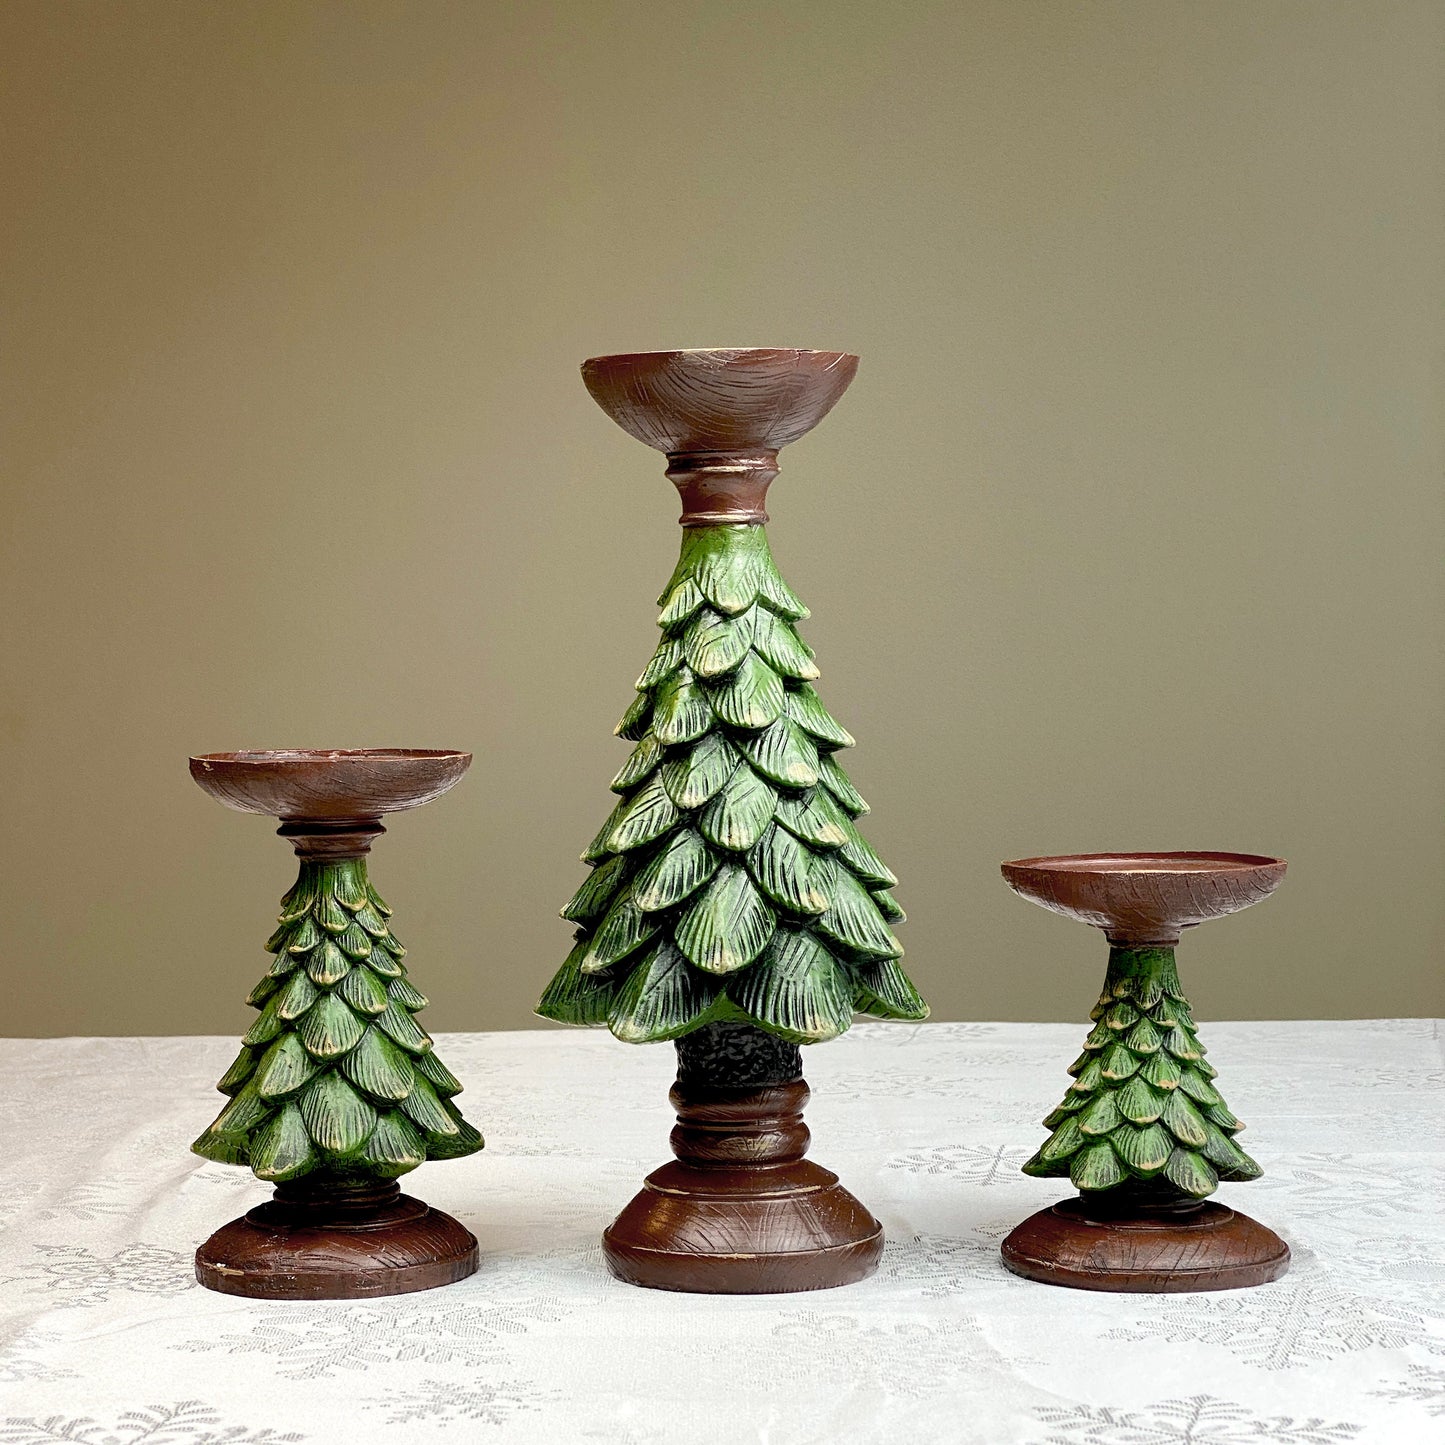 Christmas Tree Candle Holder, Set of 3, Holiday Centerpiece Display, Pine Tree Table decor for winter season autumn